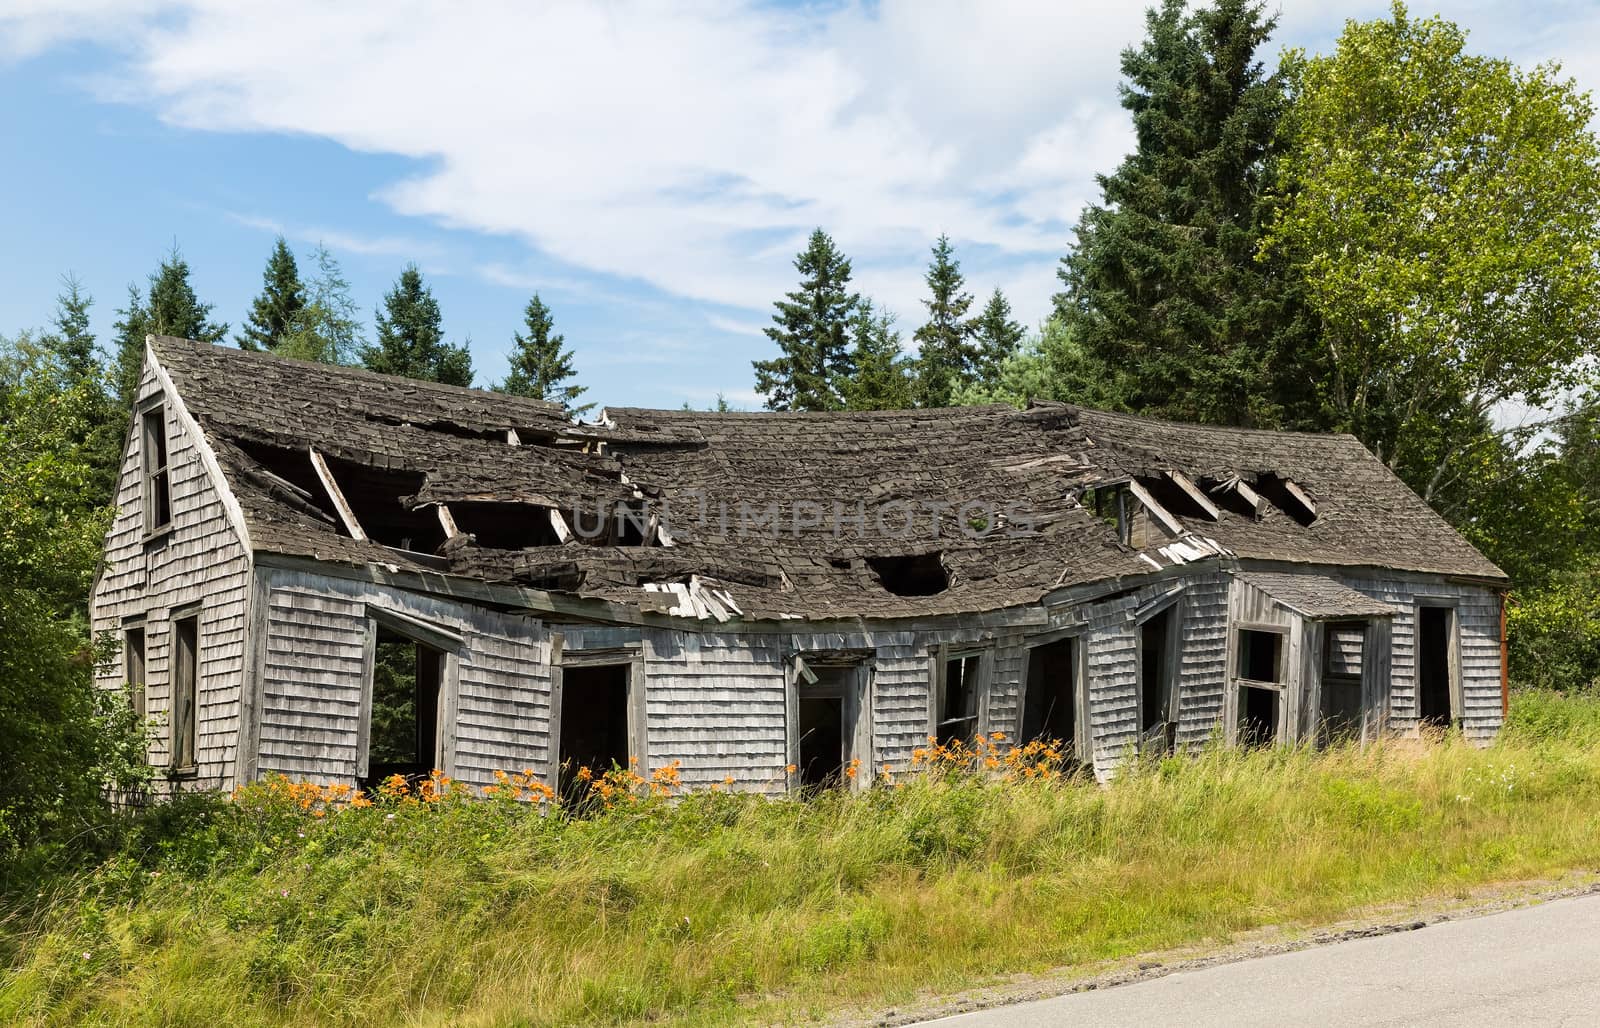 An old abandoned building is sitting along the highway surrounded by the beauty of the Maine countryside.